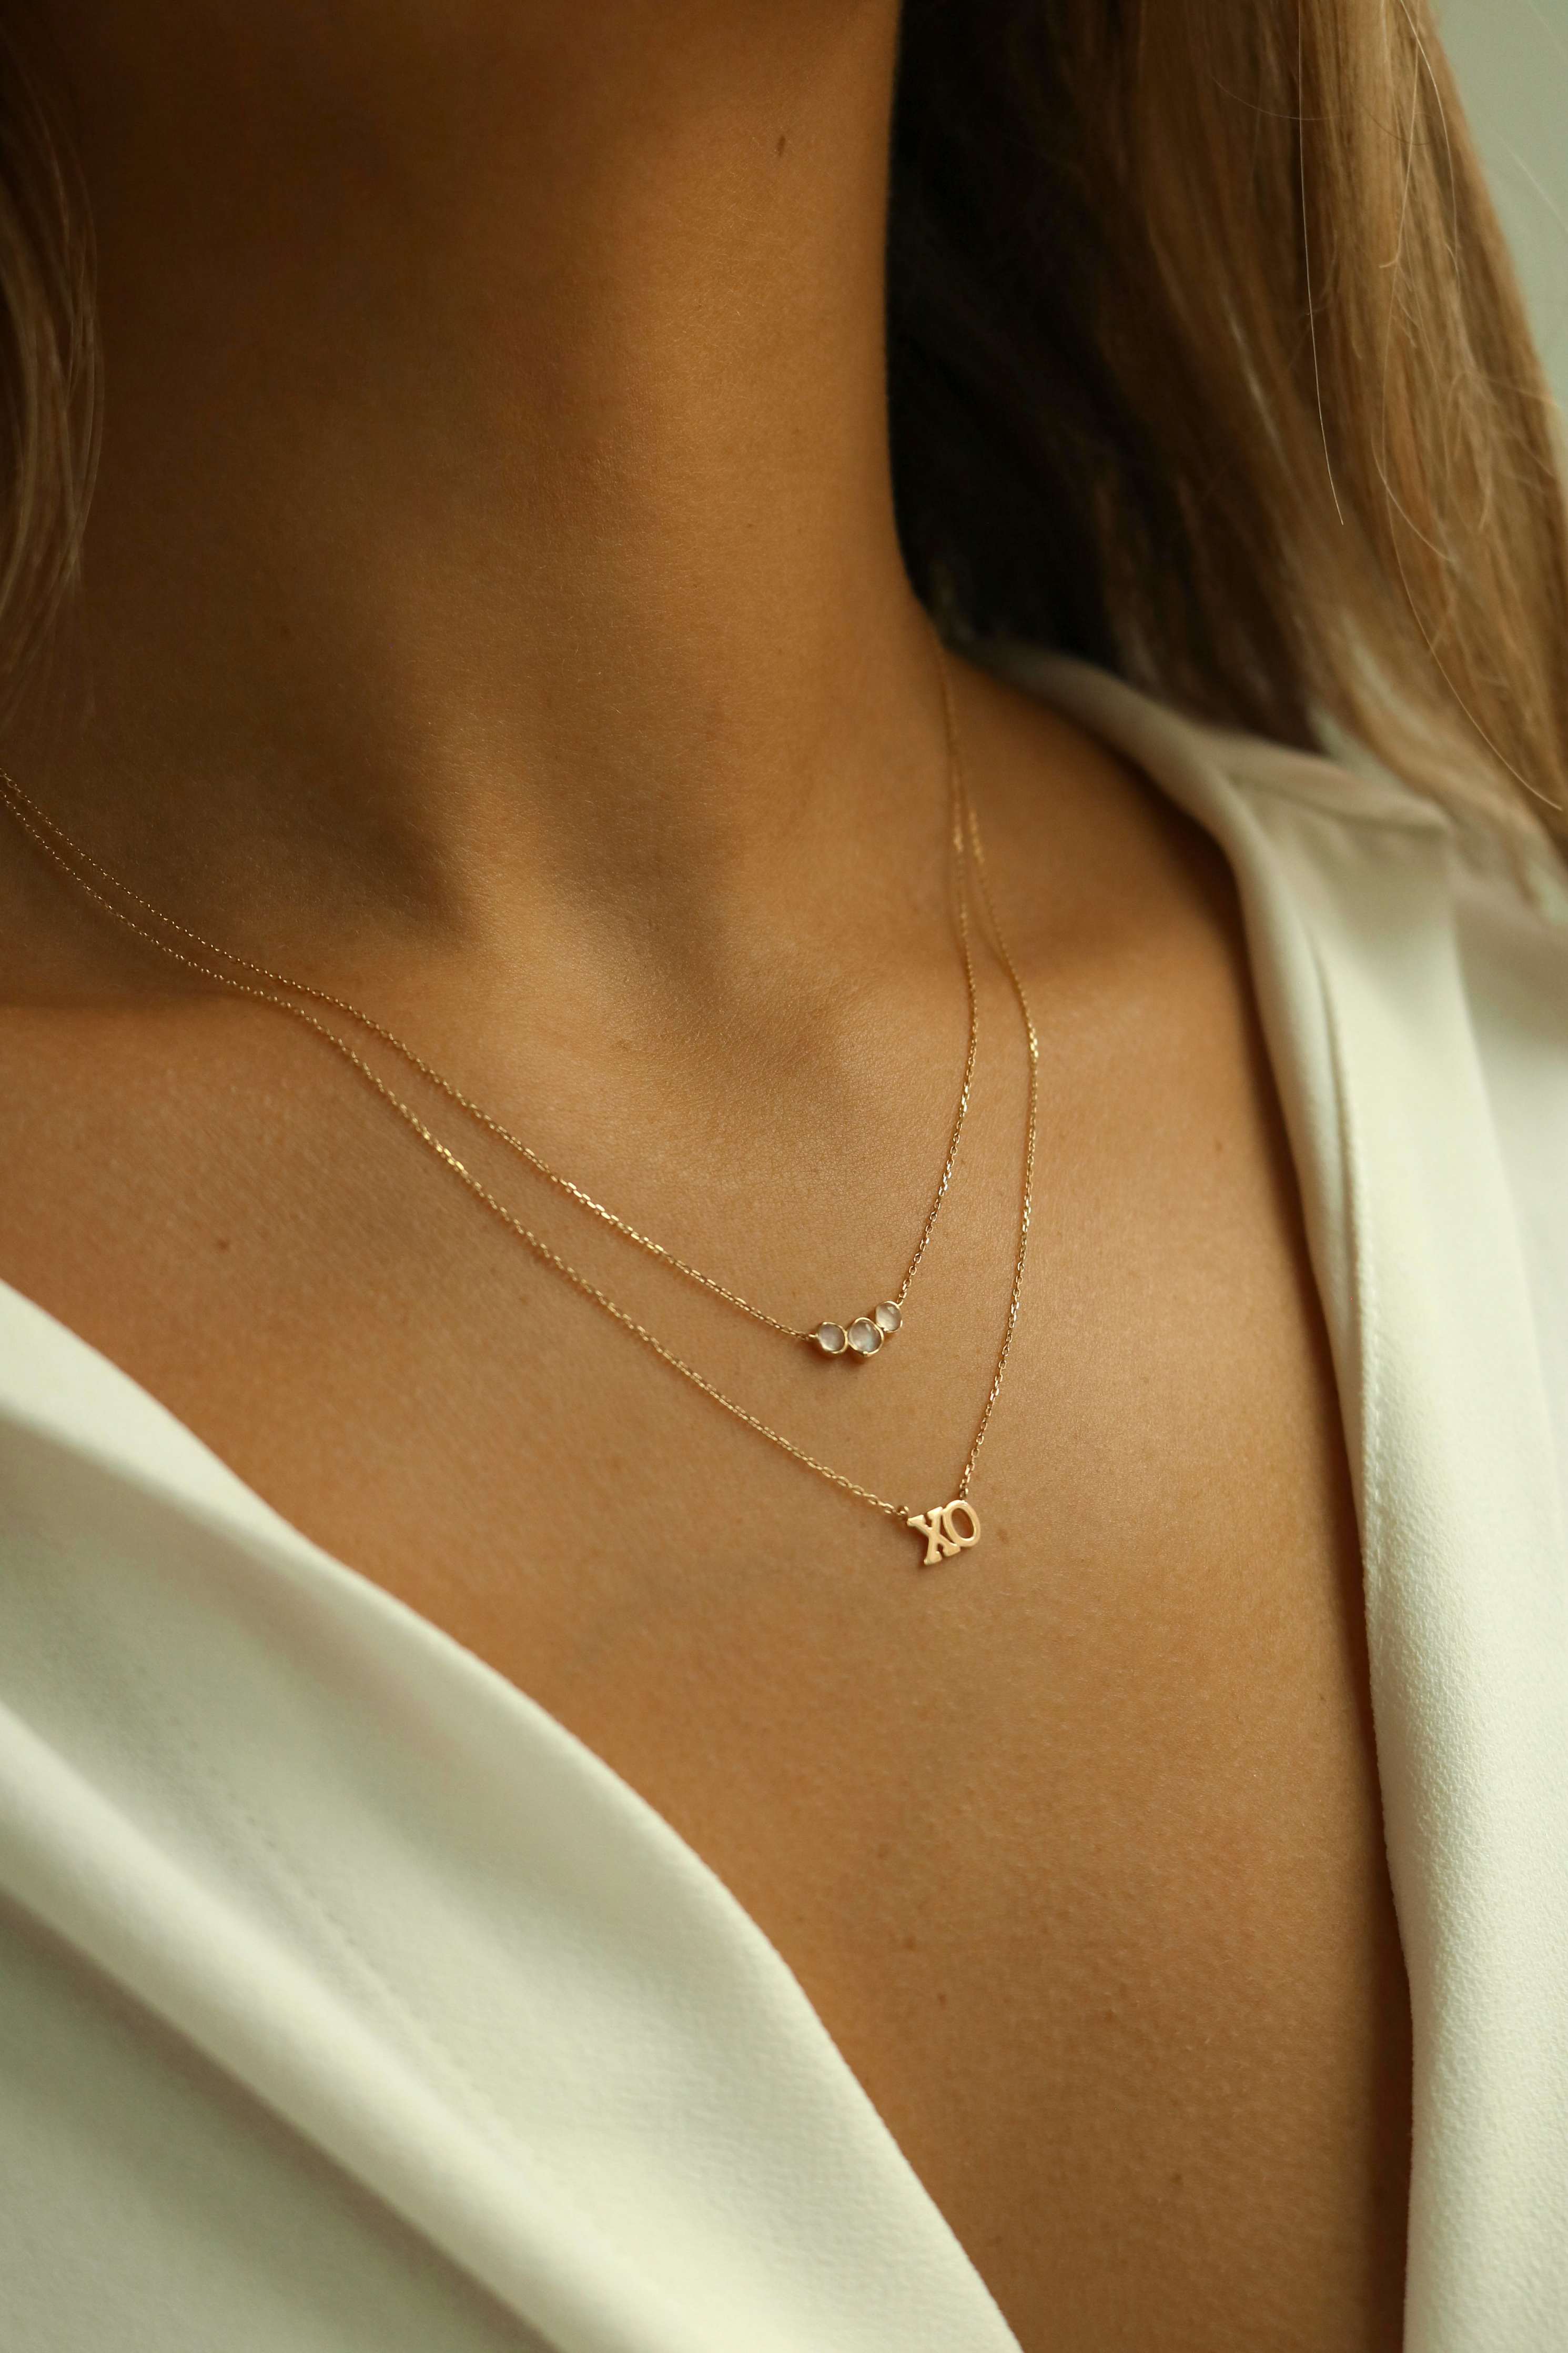 XO Necklace - gold XO necklace, I love you necklace, hugs and